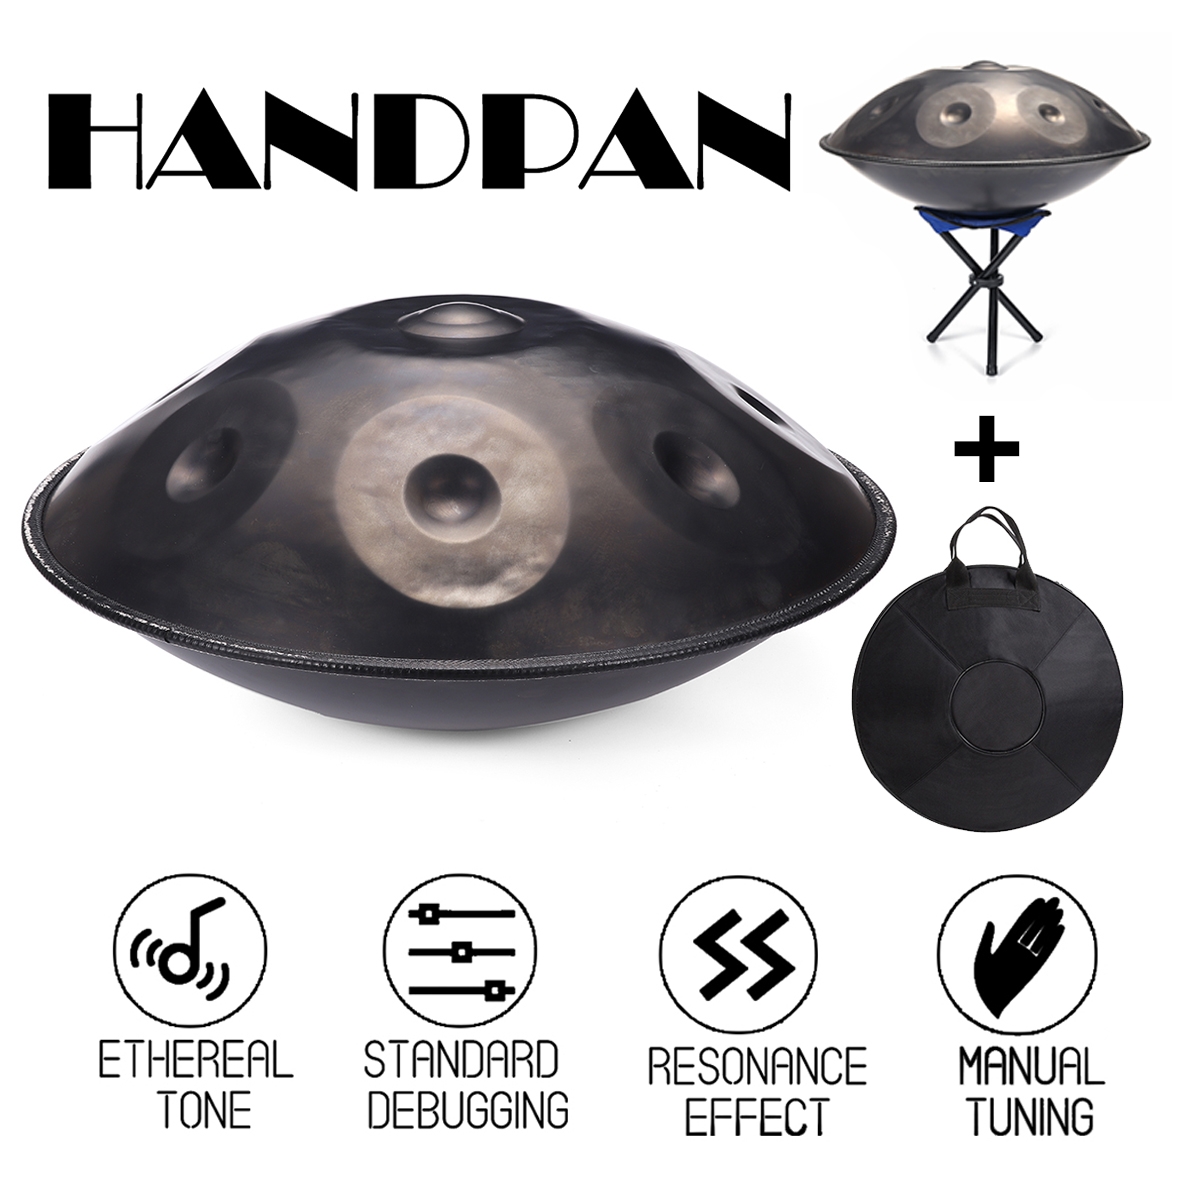 Hang F major/D minor 9 Notes Musical Hand Drum Professional Handpan Durable Carbon Steel Drum with Foldable Drum Stand